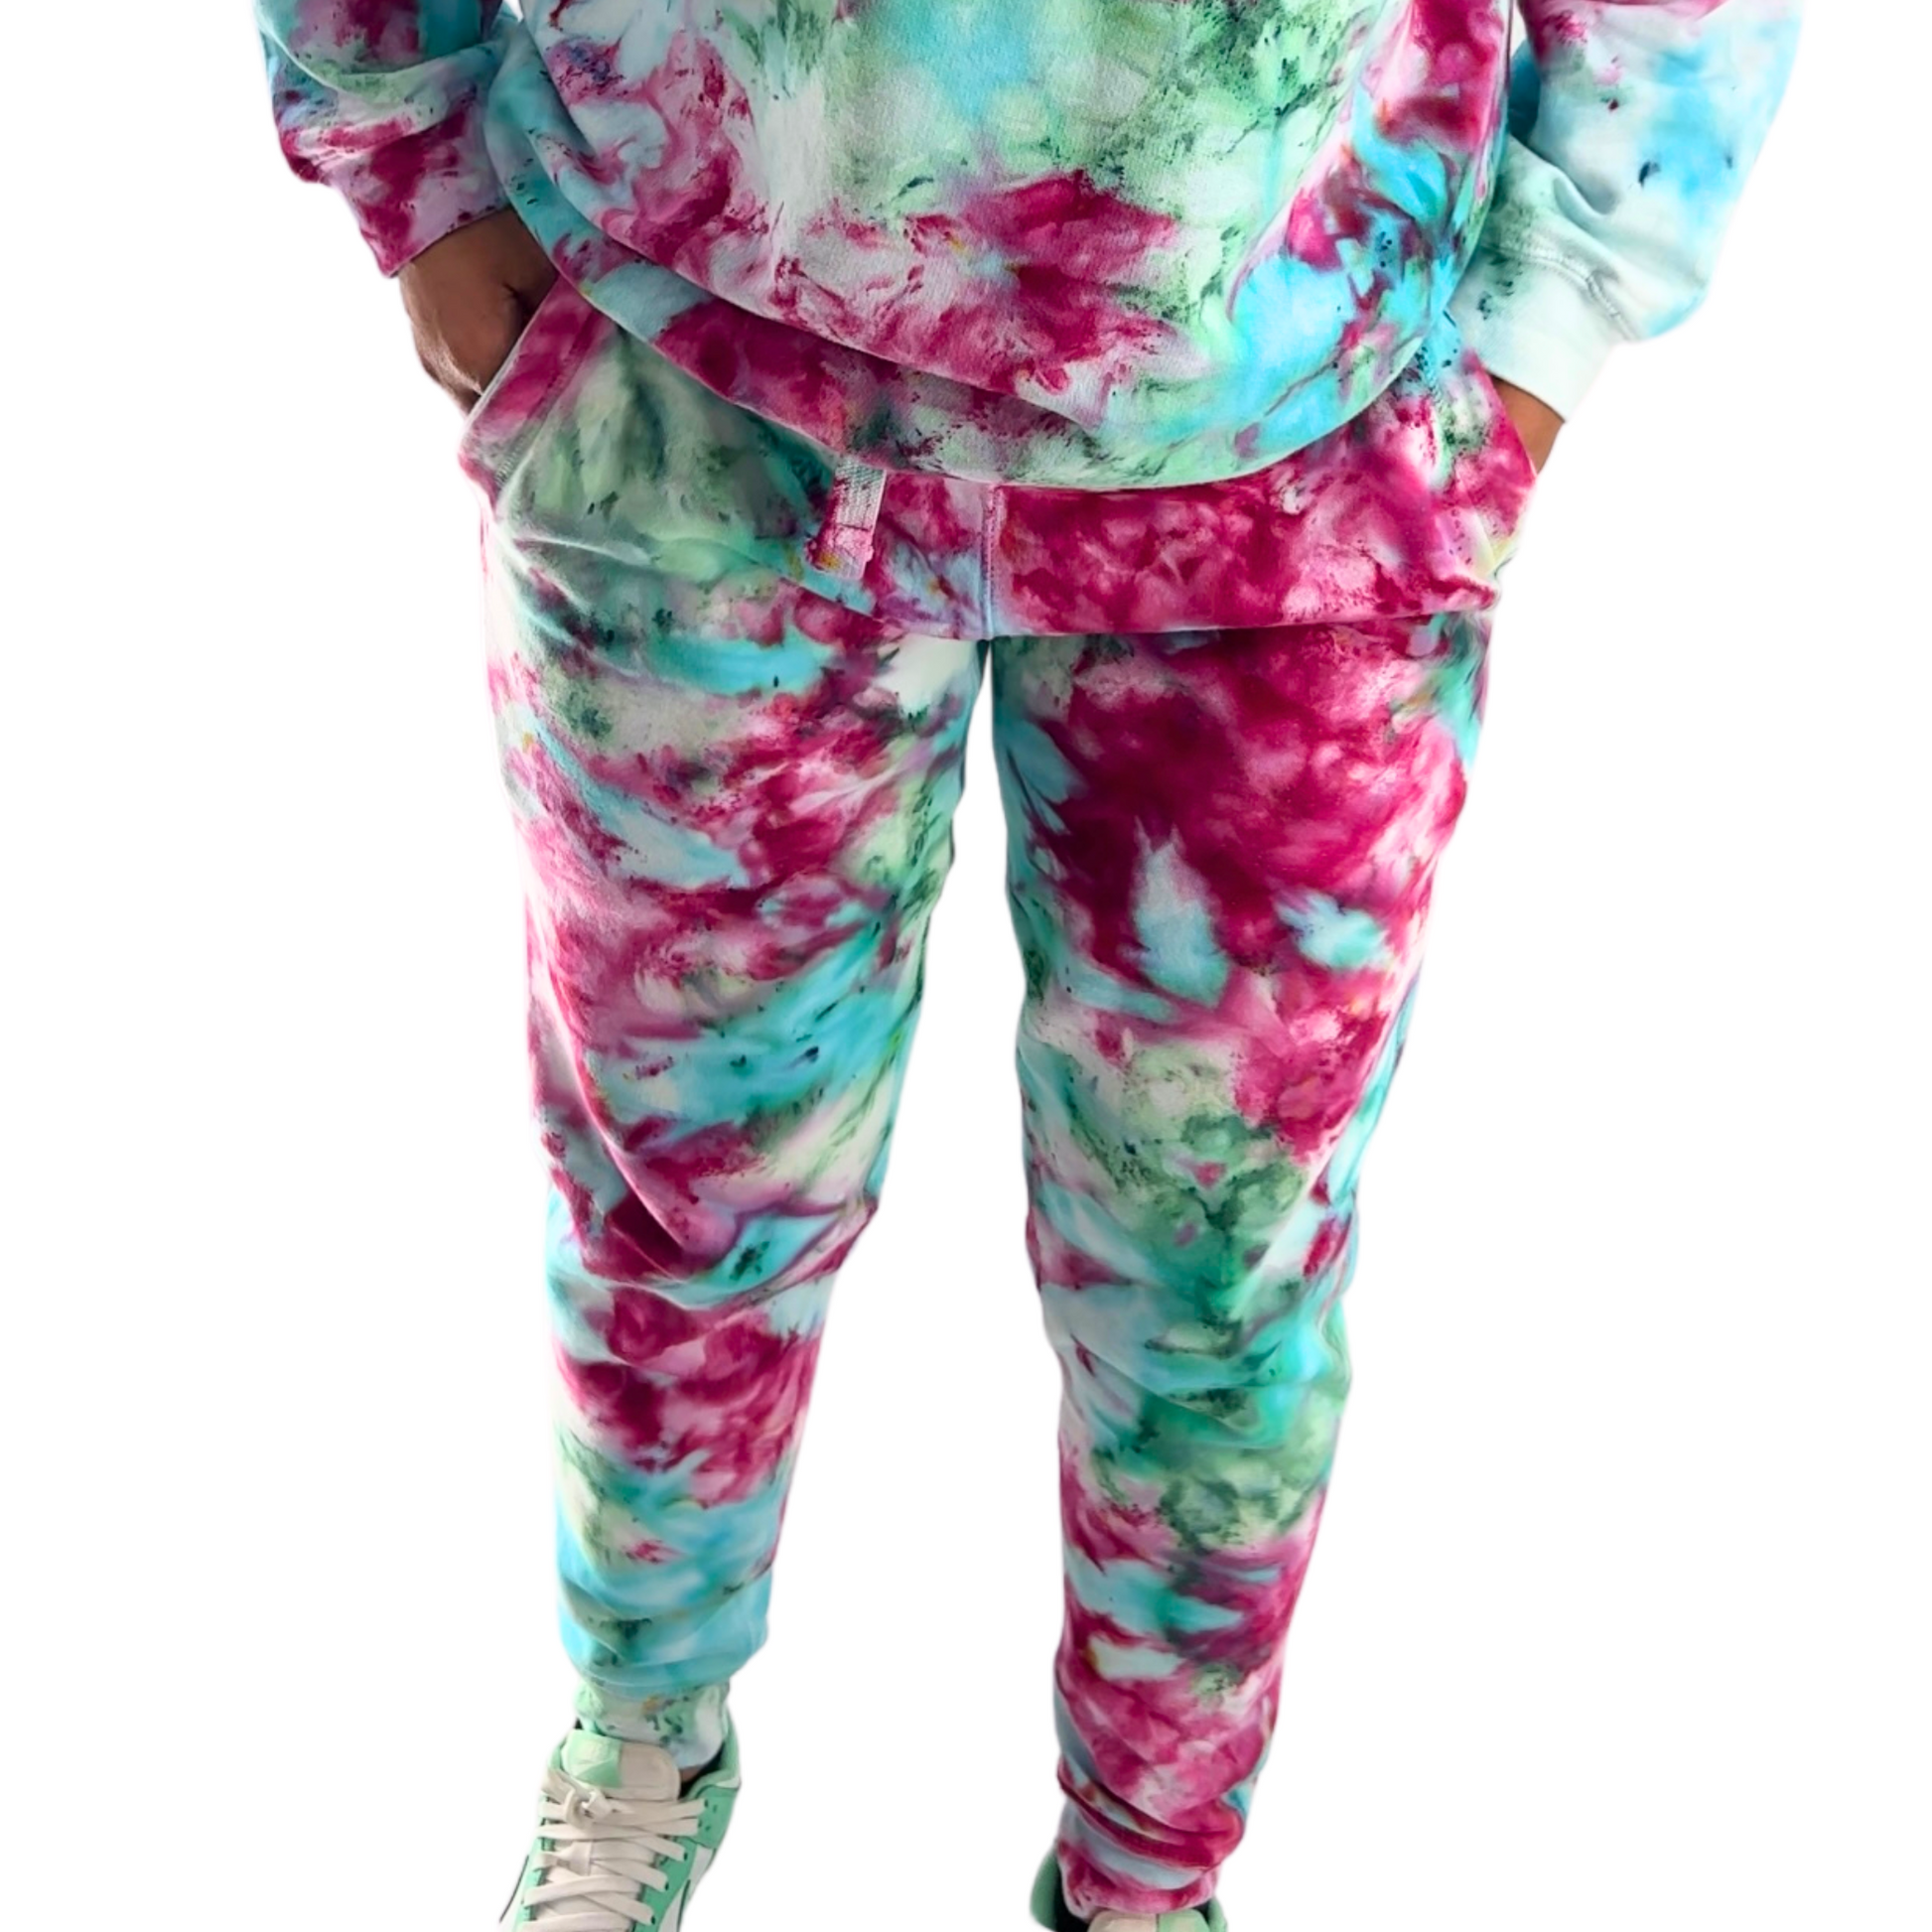 vibrant ice dyed joggers with hues of pink, baby blue, and green throughout. Cuffed ankle with a drawstring waistband